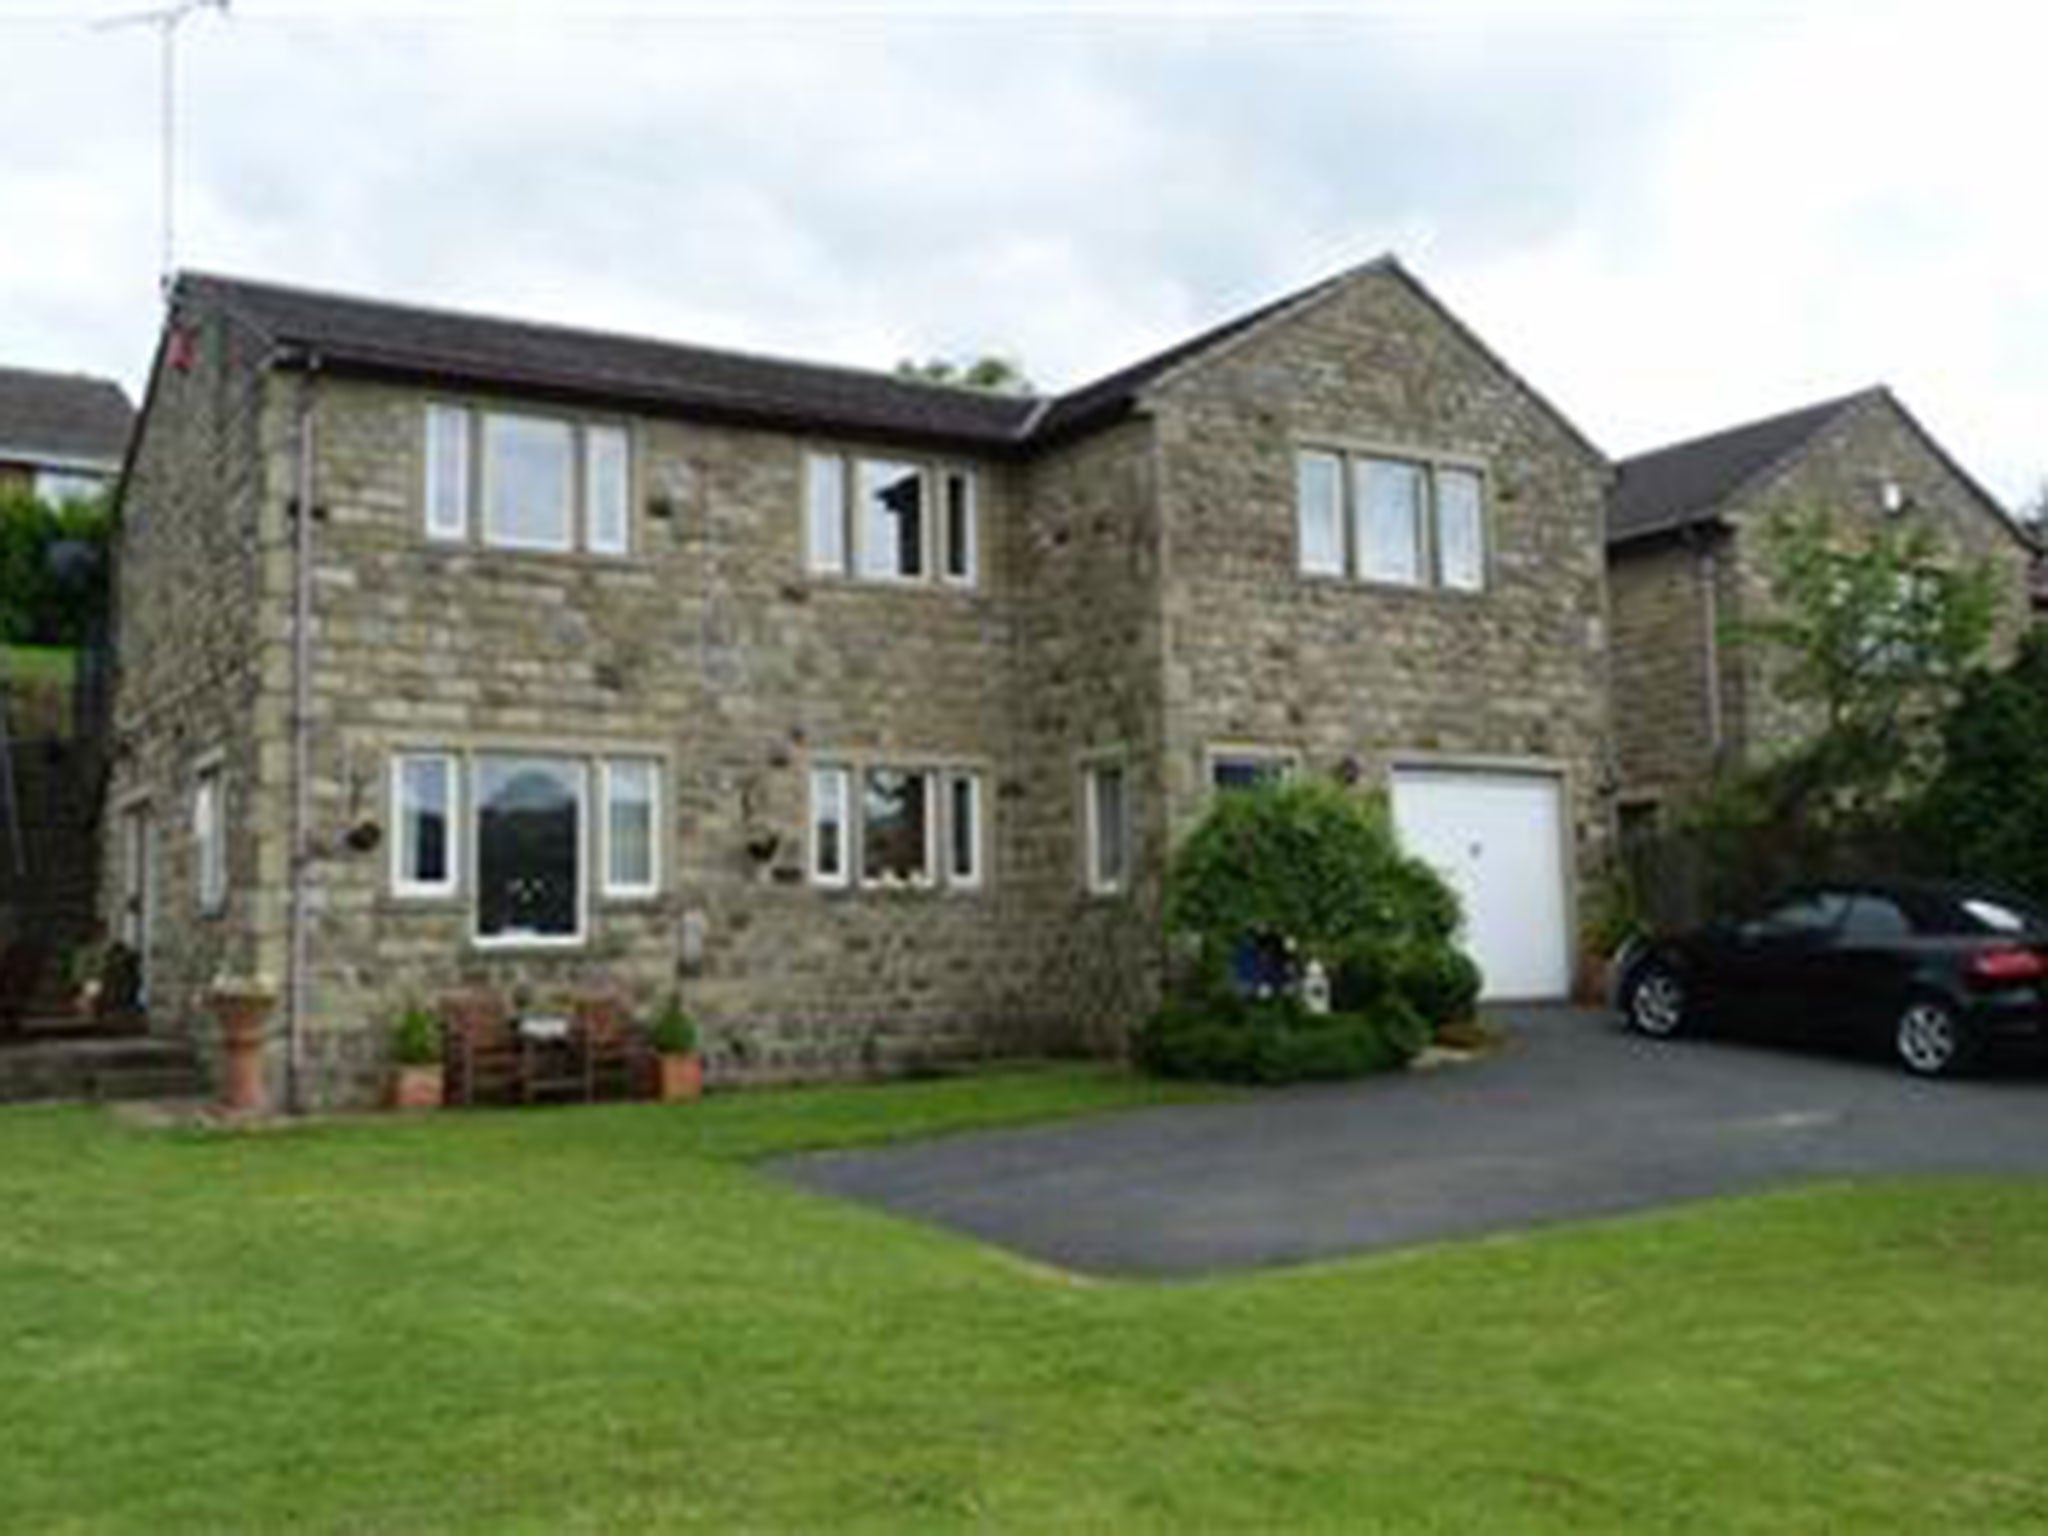 A five bedroom detached house for sale in Cowlersley, Huddersfield, West Yorkshire, for £275,000